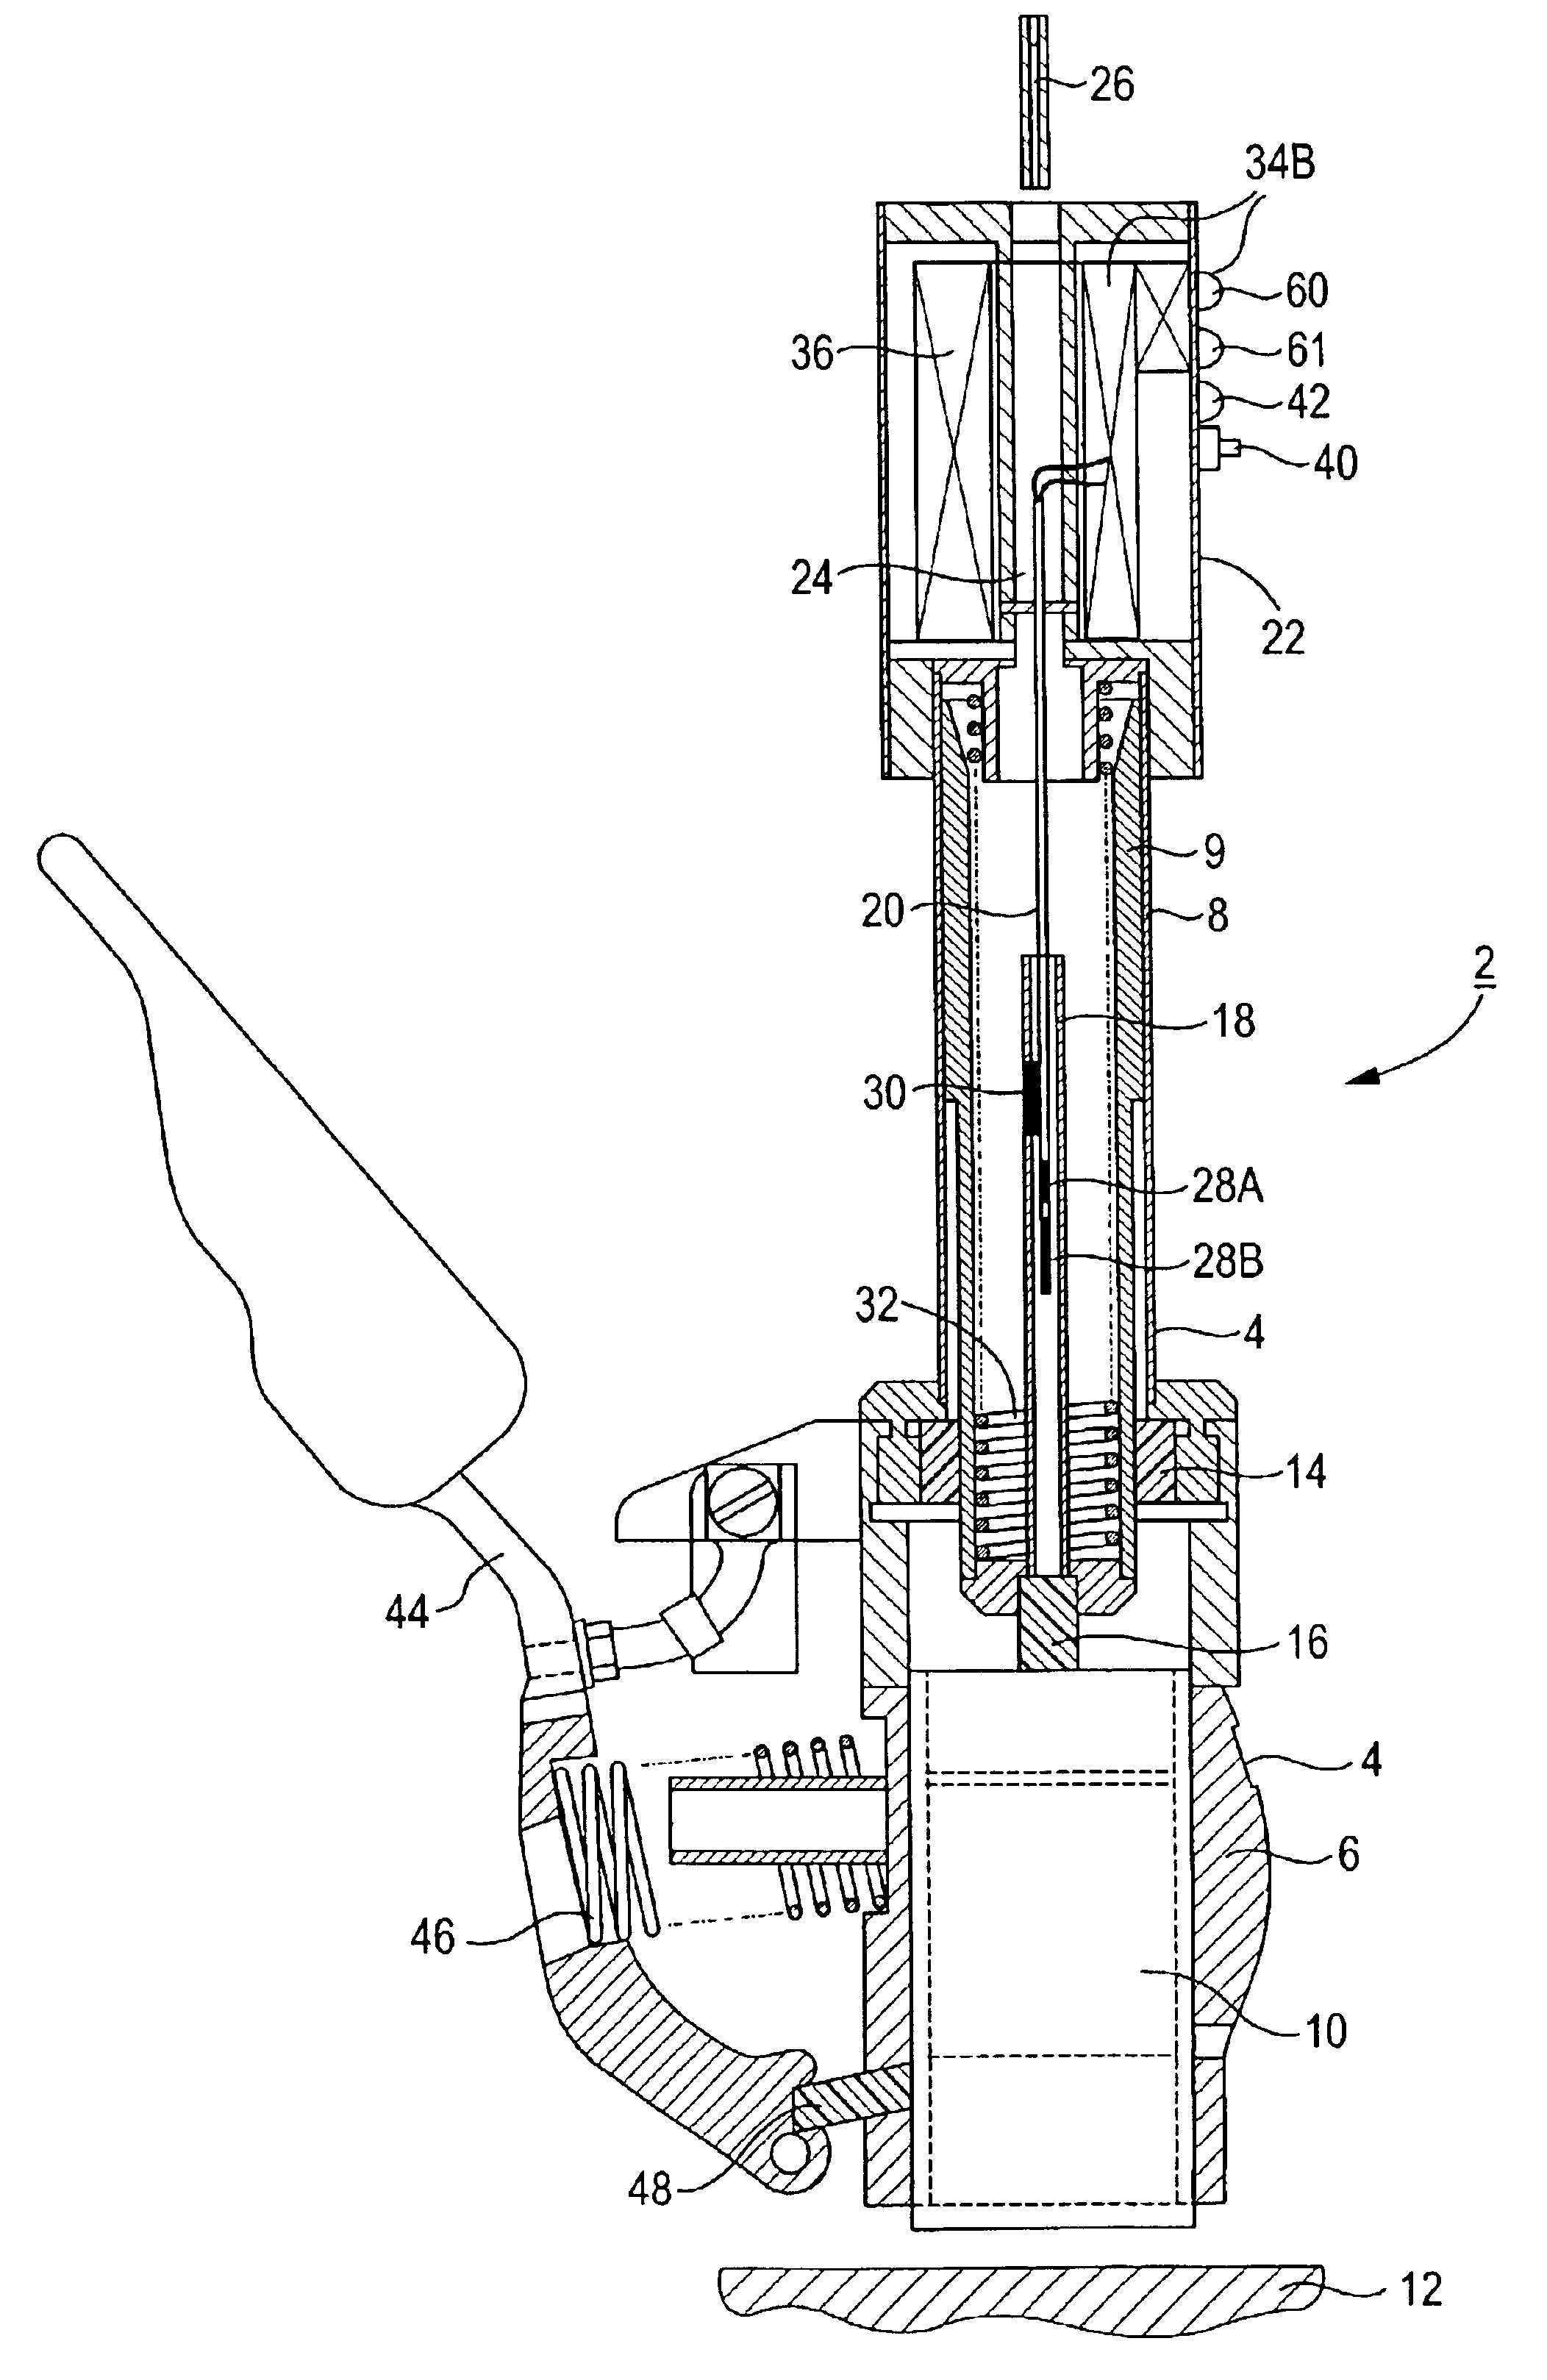 Apparatus for monitoring a sliding contact element in an electrical rotating machine